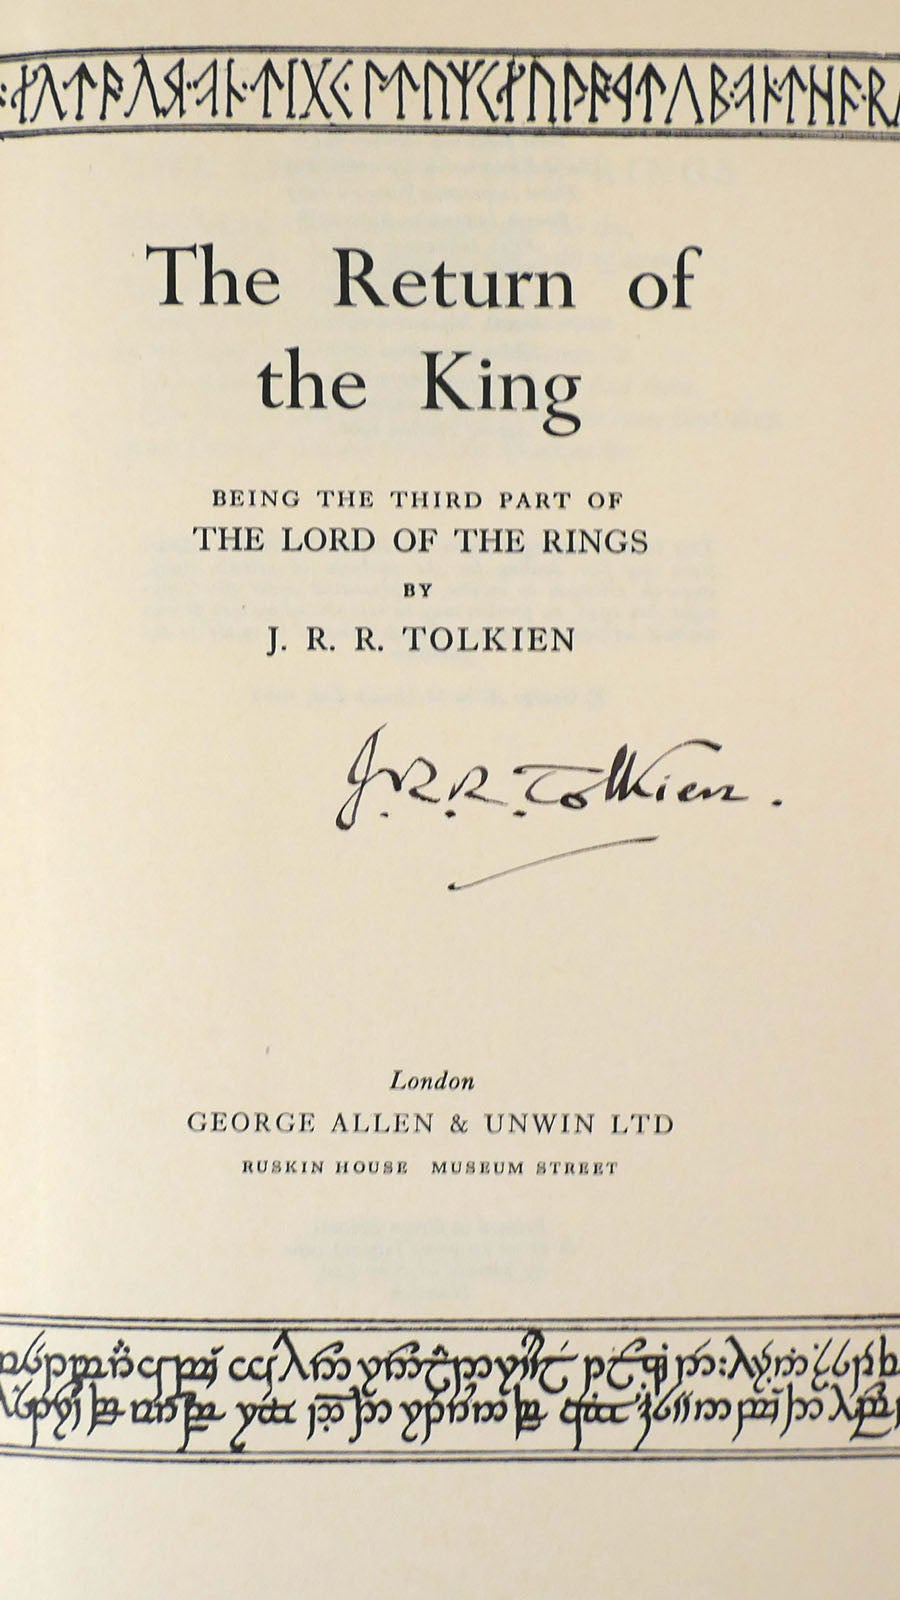 Lord of the Ring (title) - Tolkien Gateway